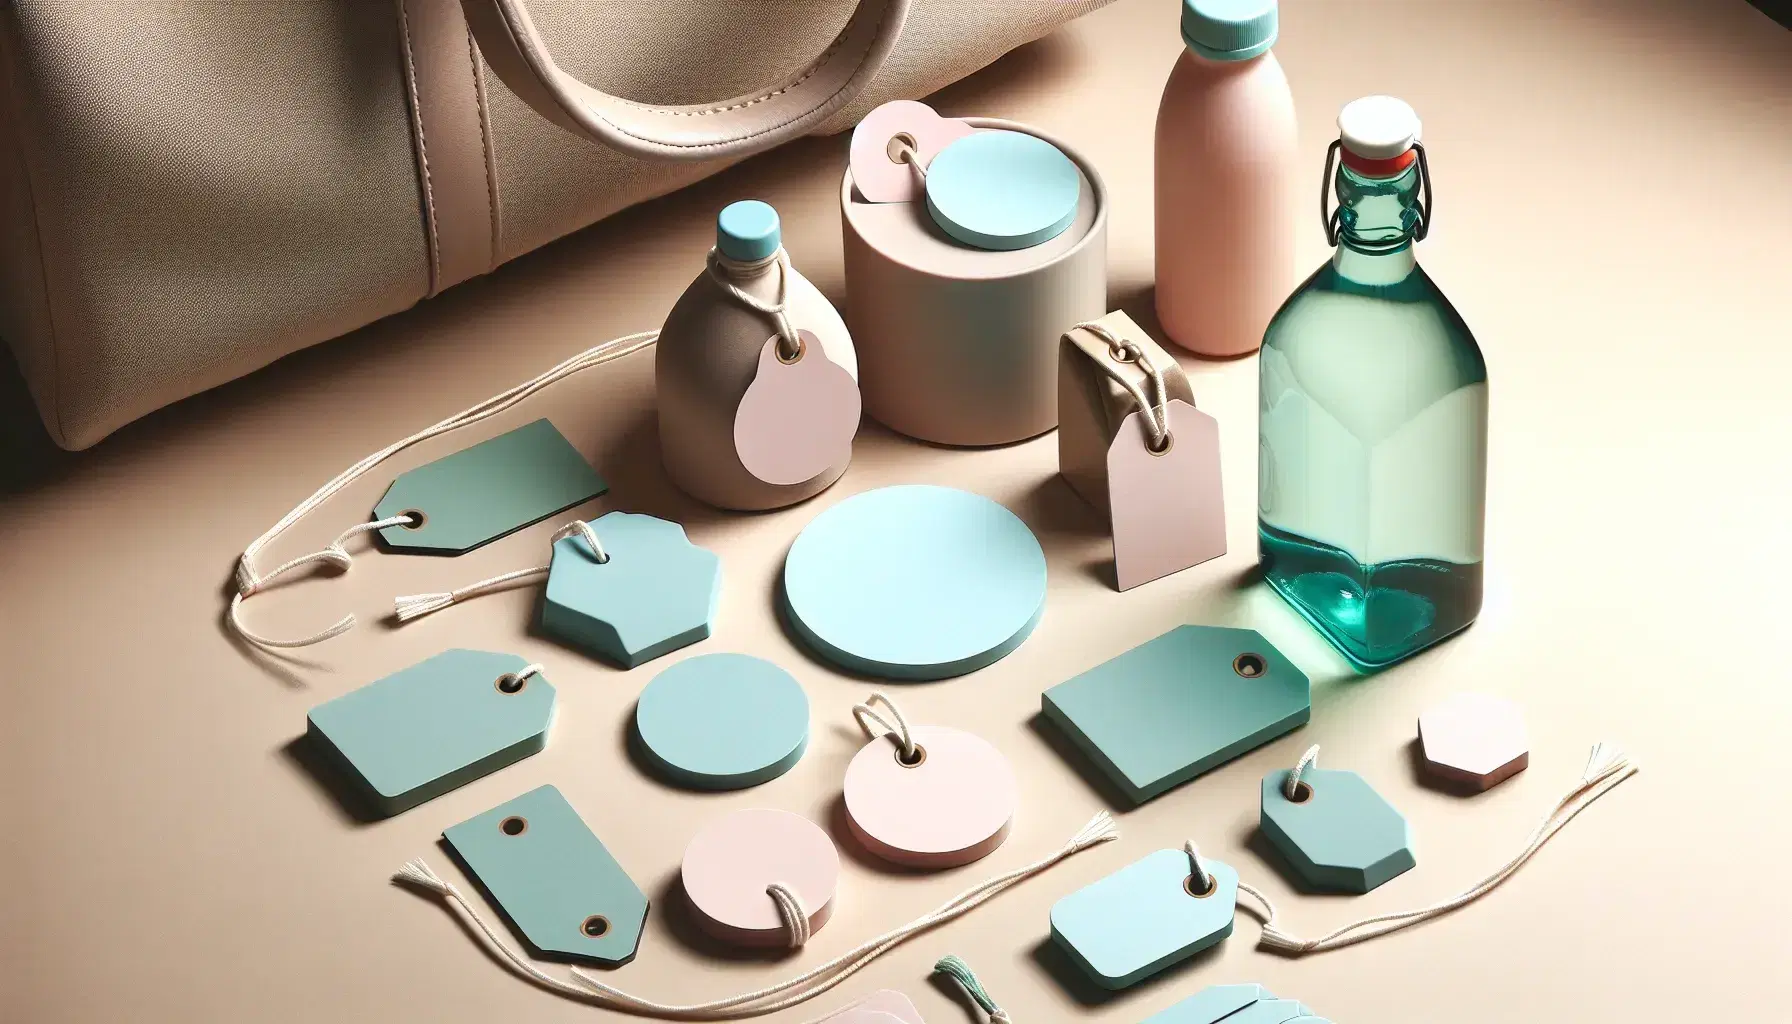 Assorted blank price tags in pastel colors attached to a kitchen pot, glass bottle, leather handbag, and potted plant, against an off-white background.